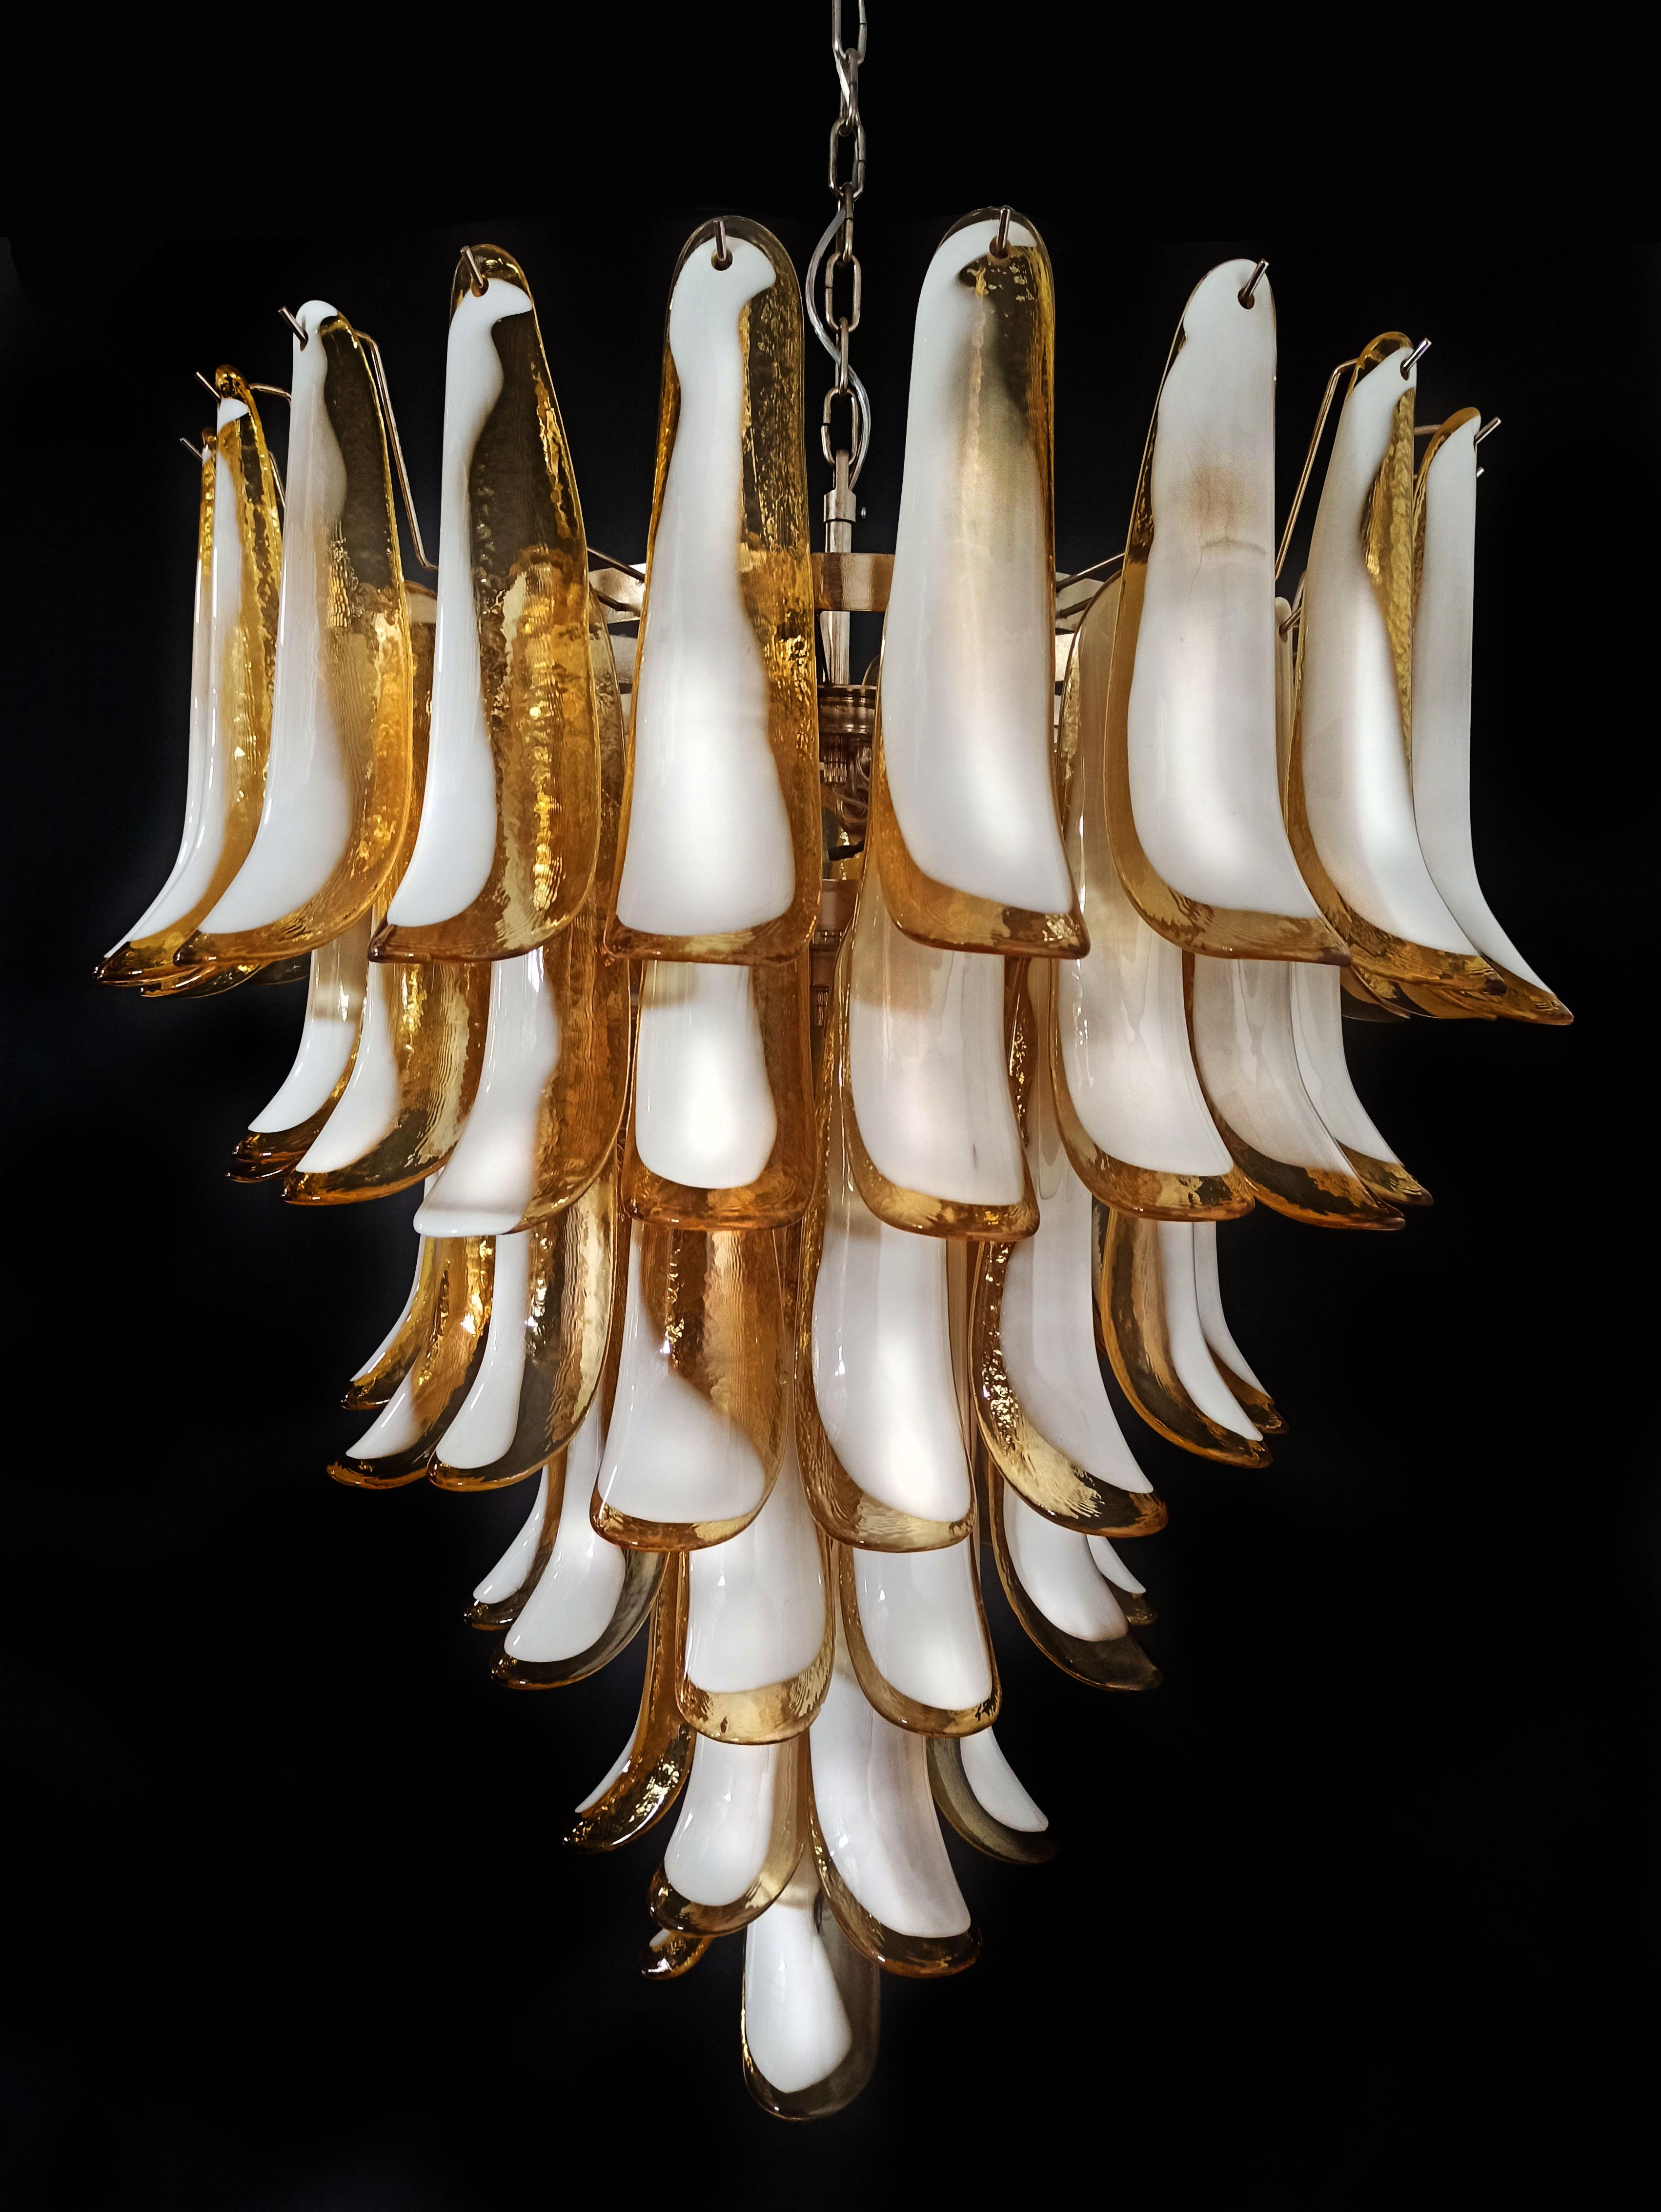 Hand blown glass chandelier composed by 75 glass amber petals in a chrome frame.
Dimensions: 65 inches (165 cm) height with chain, 37.40 inches (95 cm) height without chain, 31.50 inches (80 cm) diameter
Dimension glasses: 11.40 inches (29 cm)